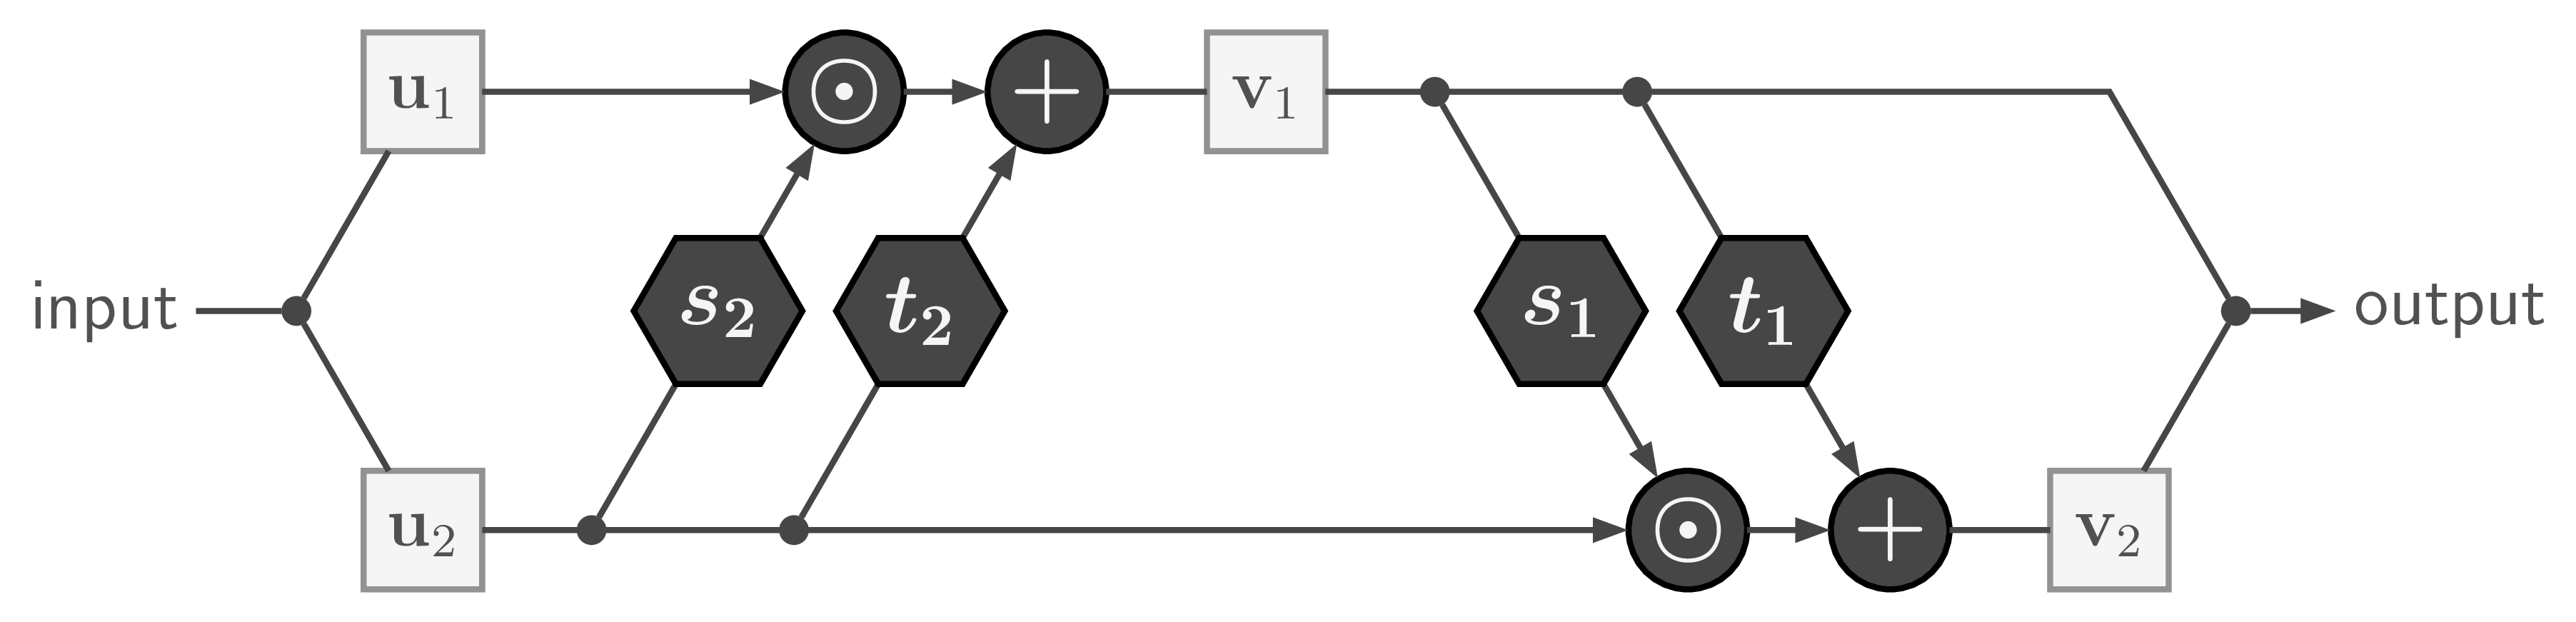 Diagram of a 'Coupling Layer', the building block of our Invertible Neural Network